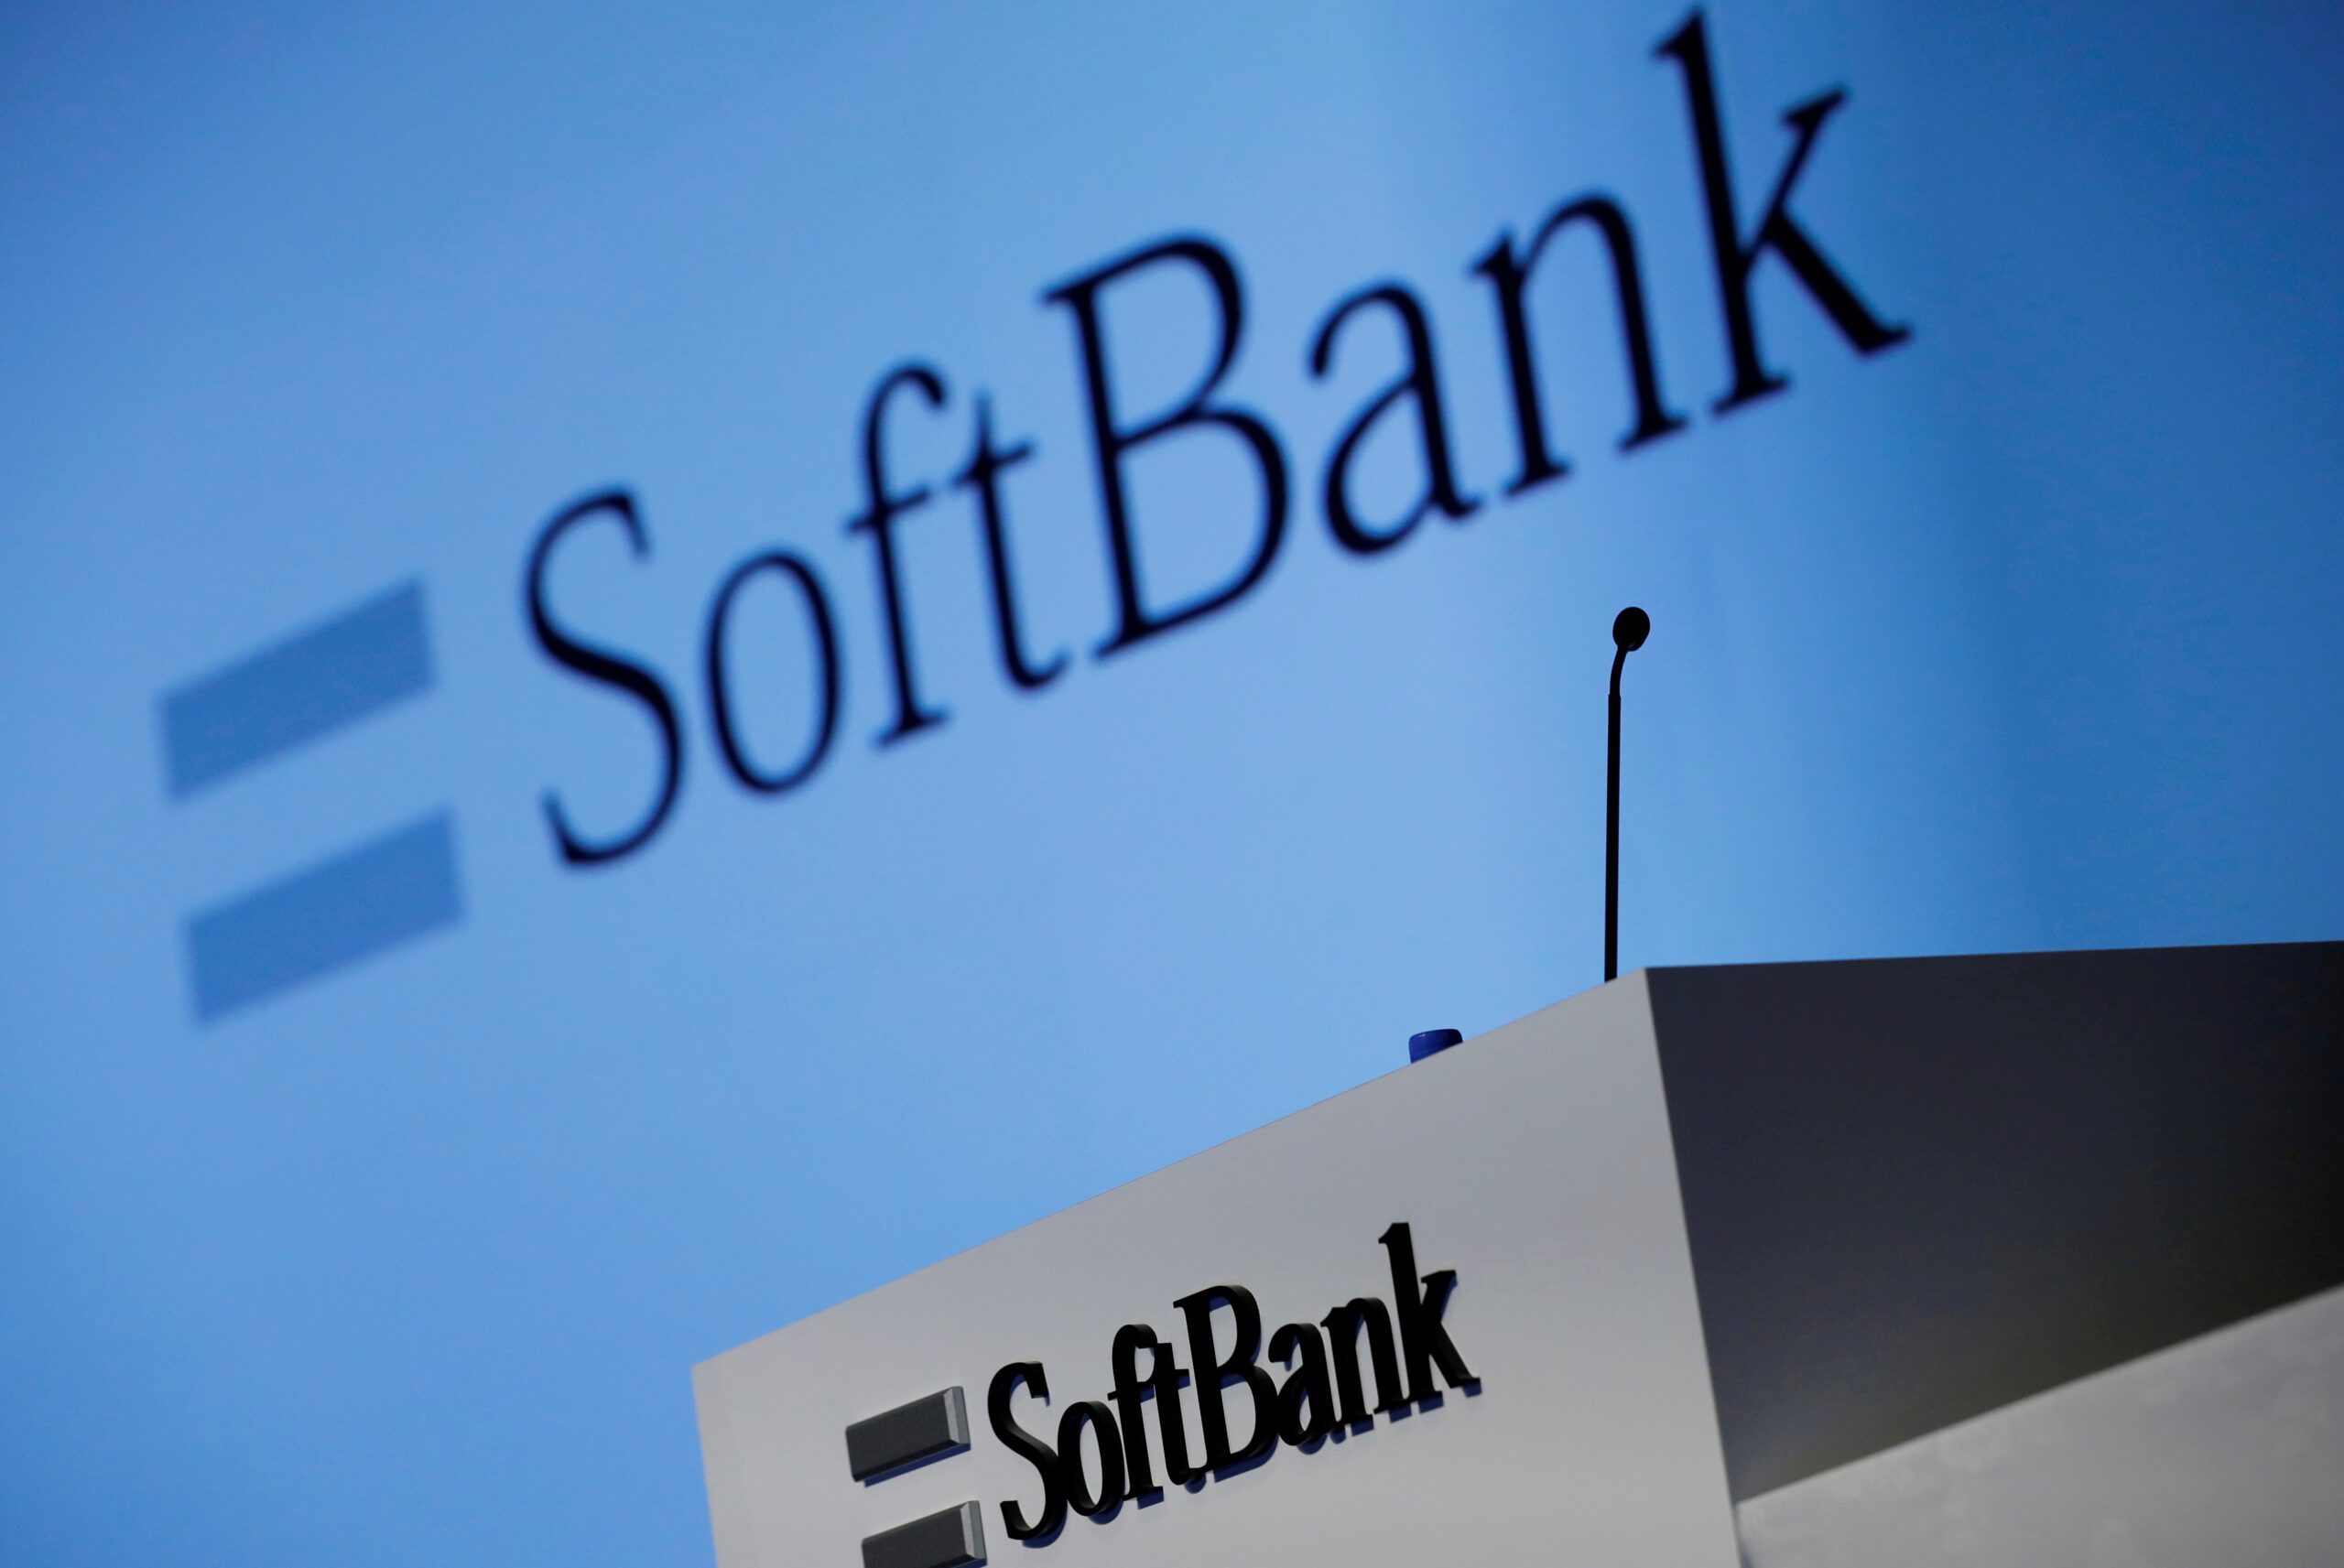 Japan's SoftBank shares swept up in AI chip frenzy ahead of Arm IPO